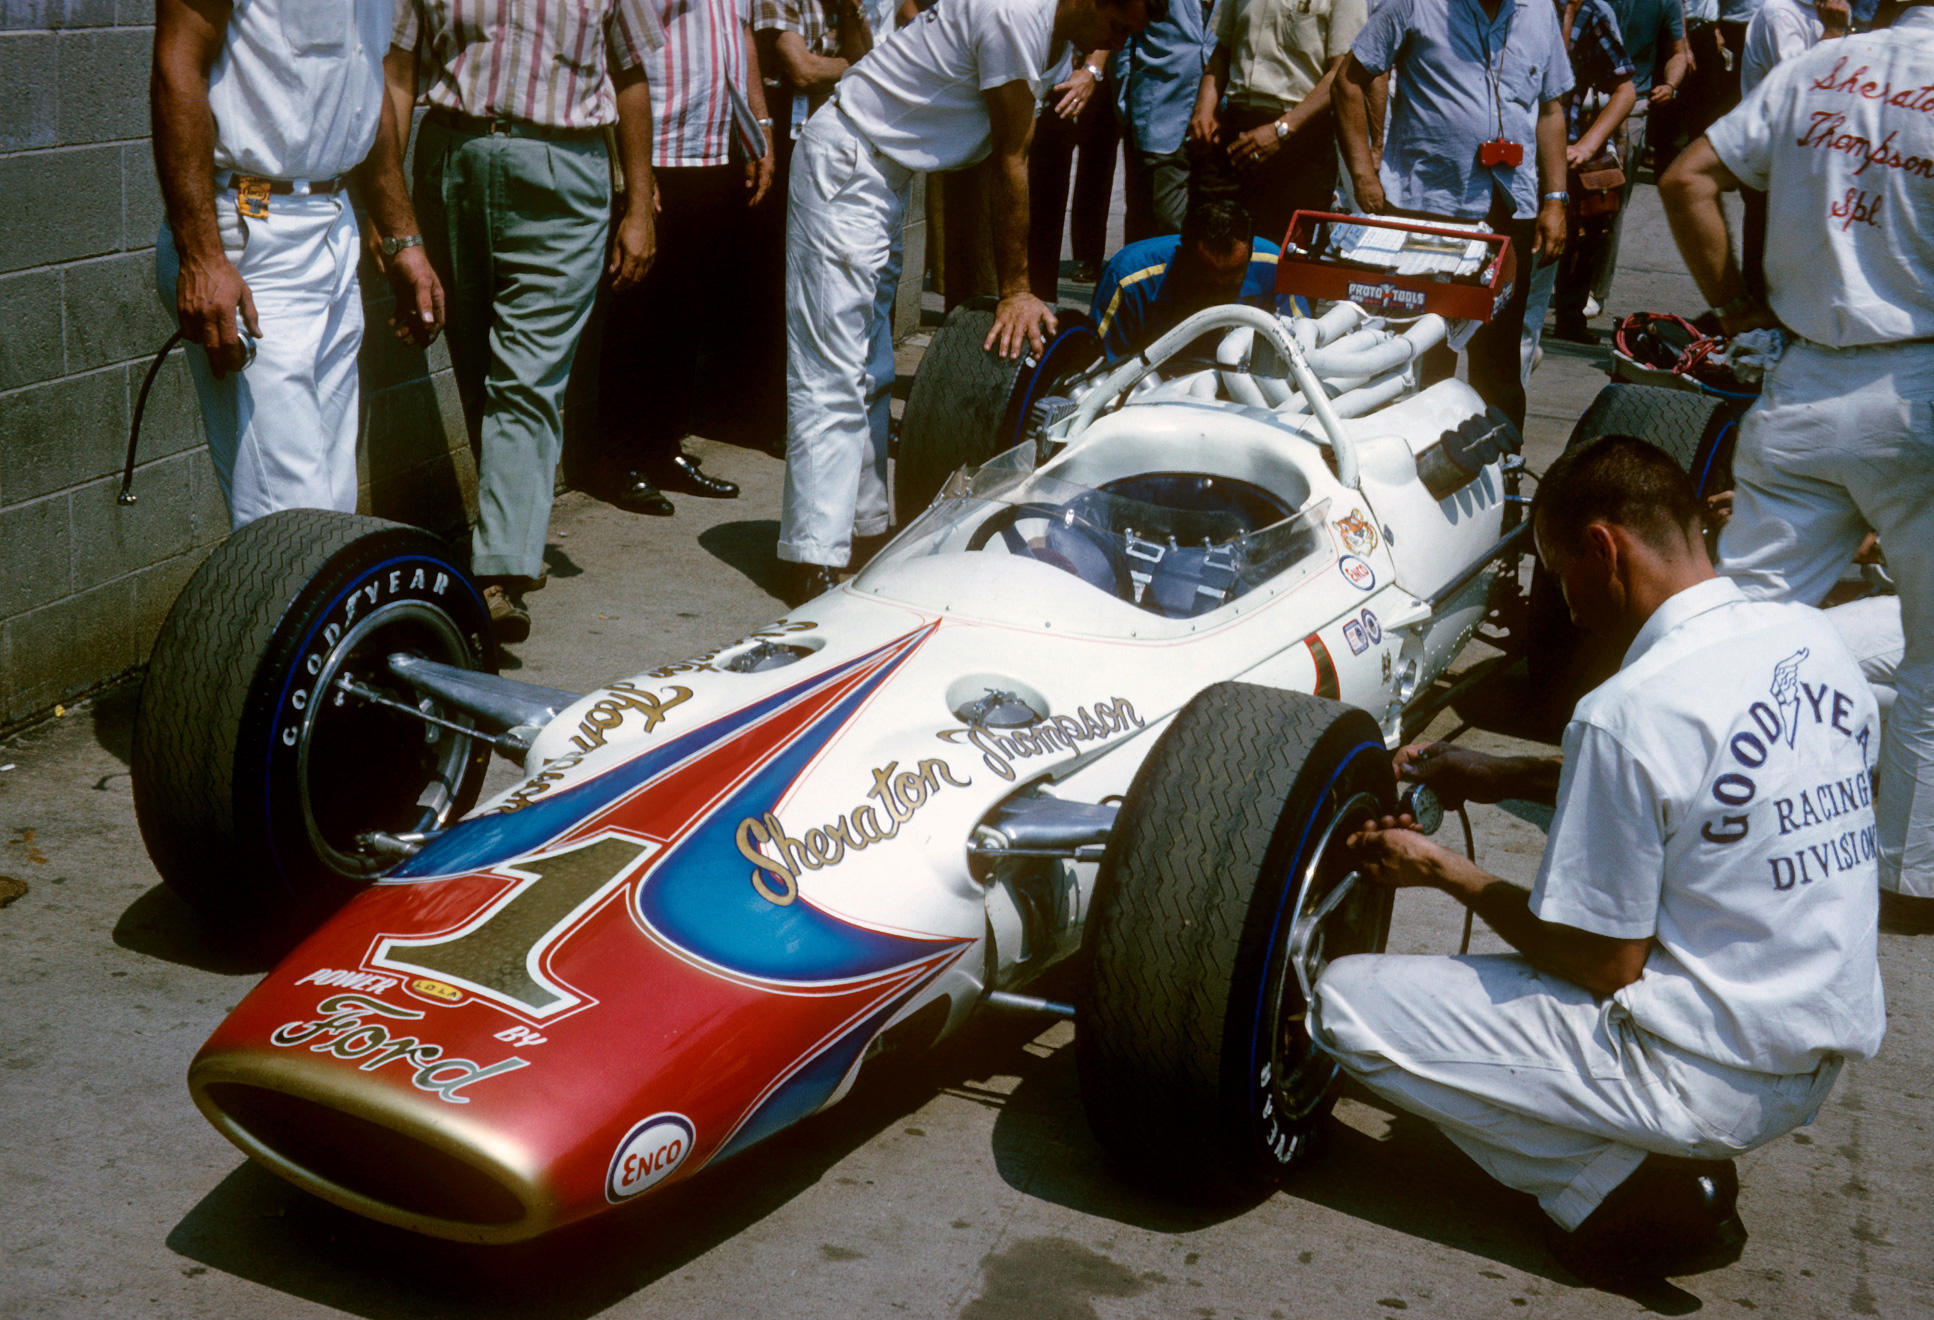 Foyt #1 Lotus-Ford 1965 In Gasoline Alley – The Chicane